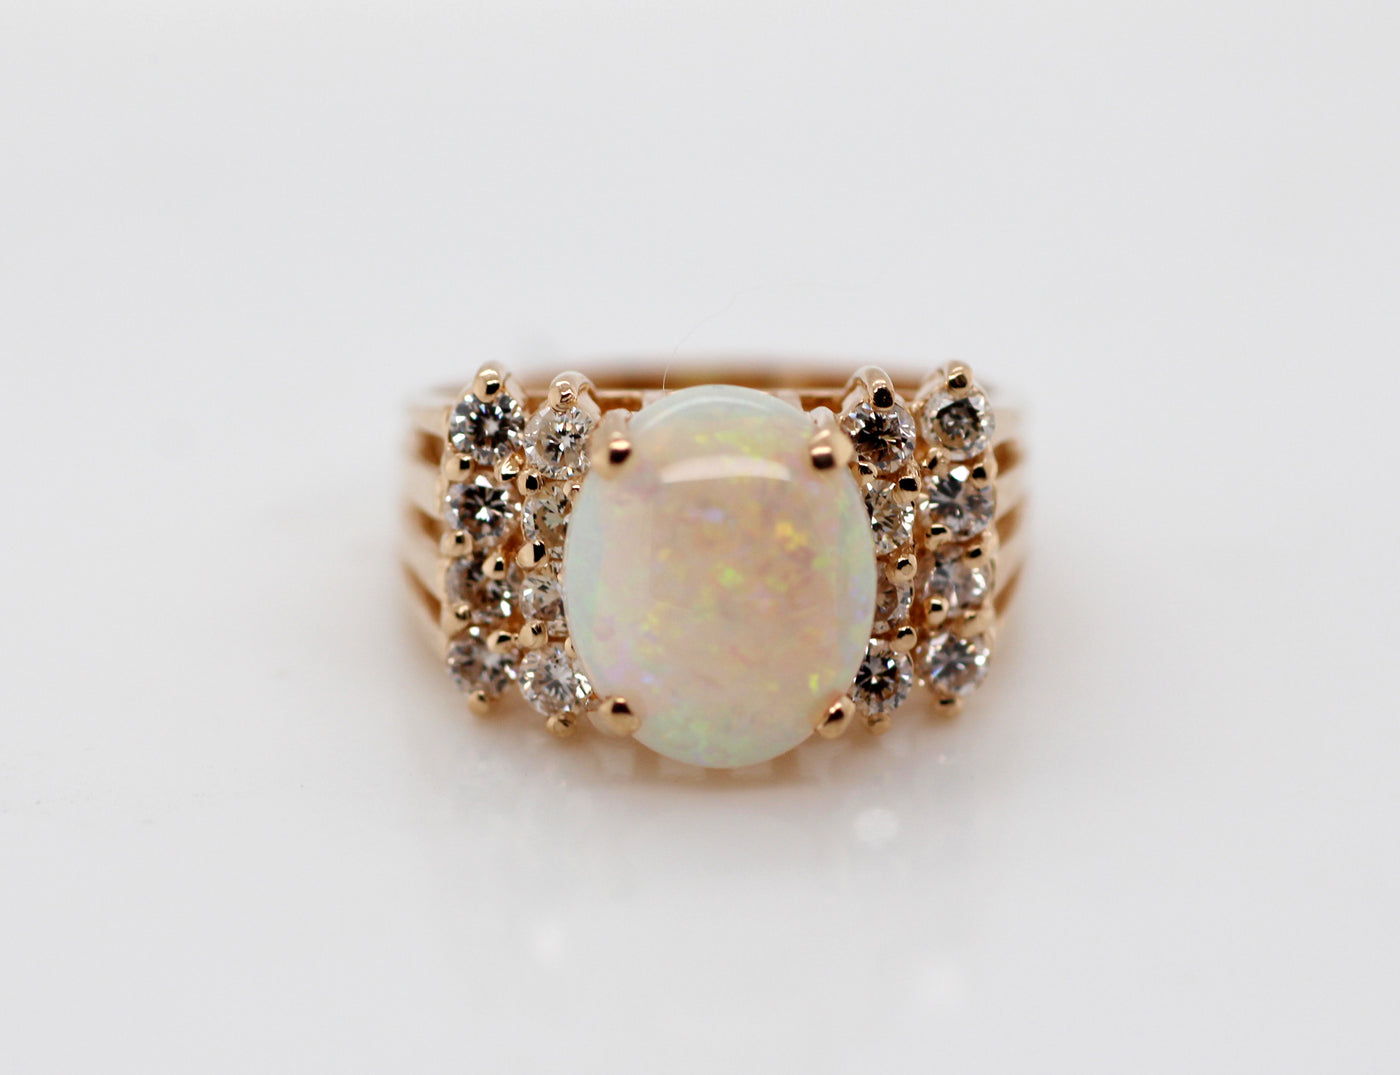 ESTATE 14KY 2.15 CT OPAL AND DIAMOND RING .60 CTTW IJ-SI2